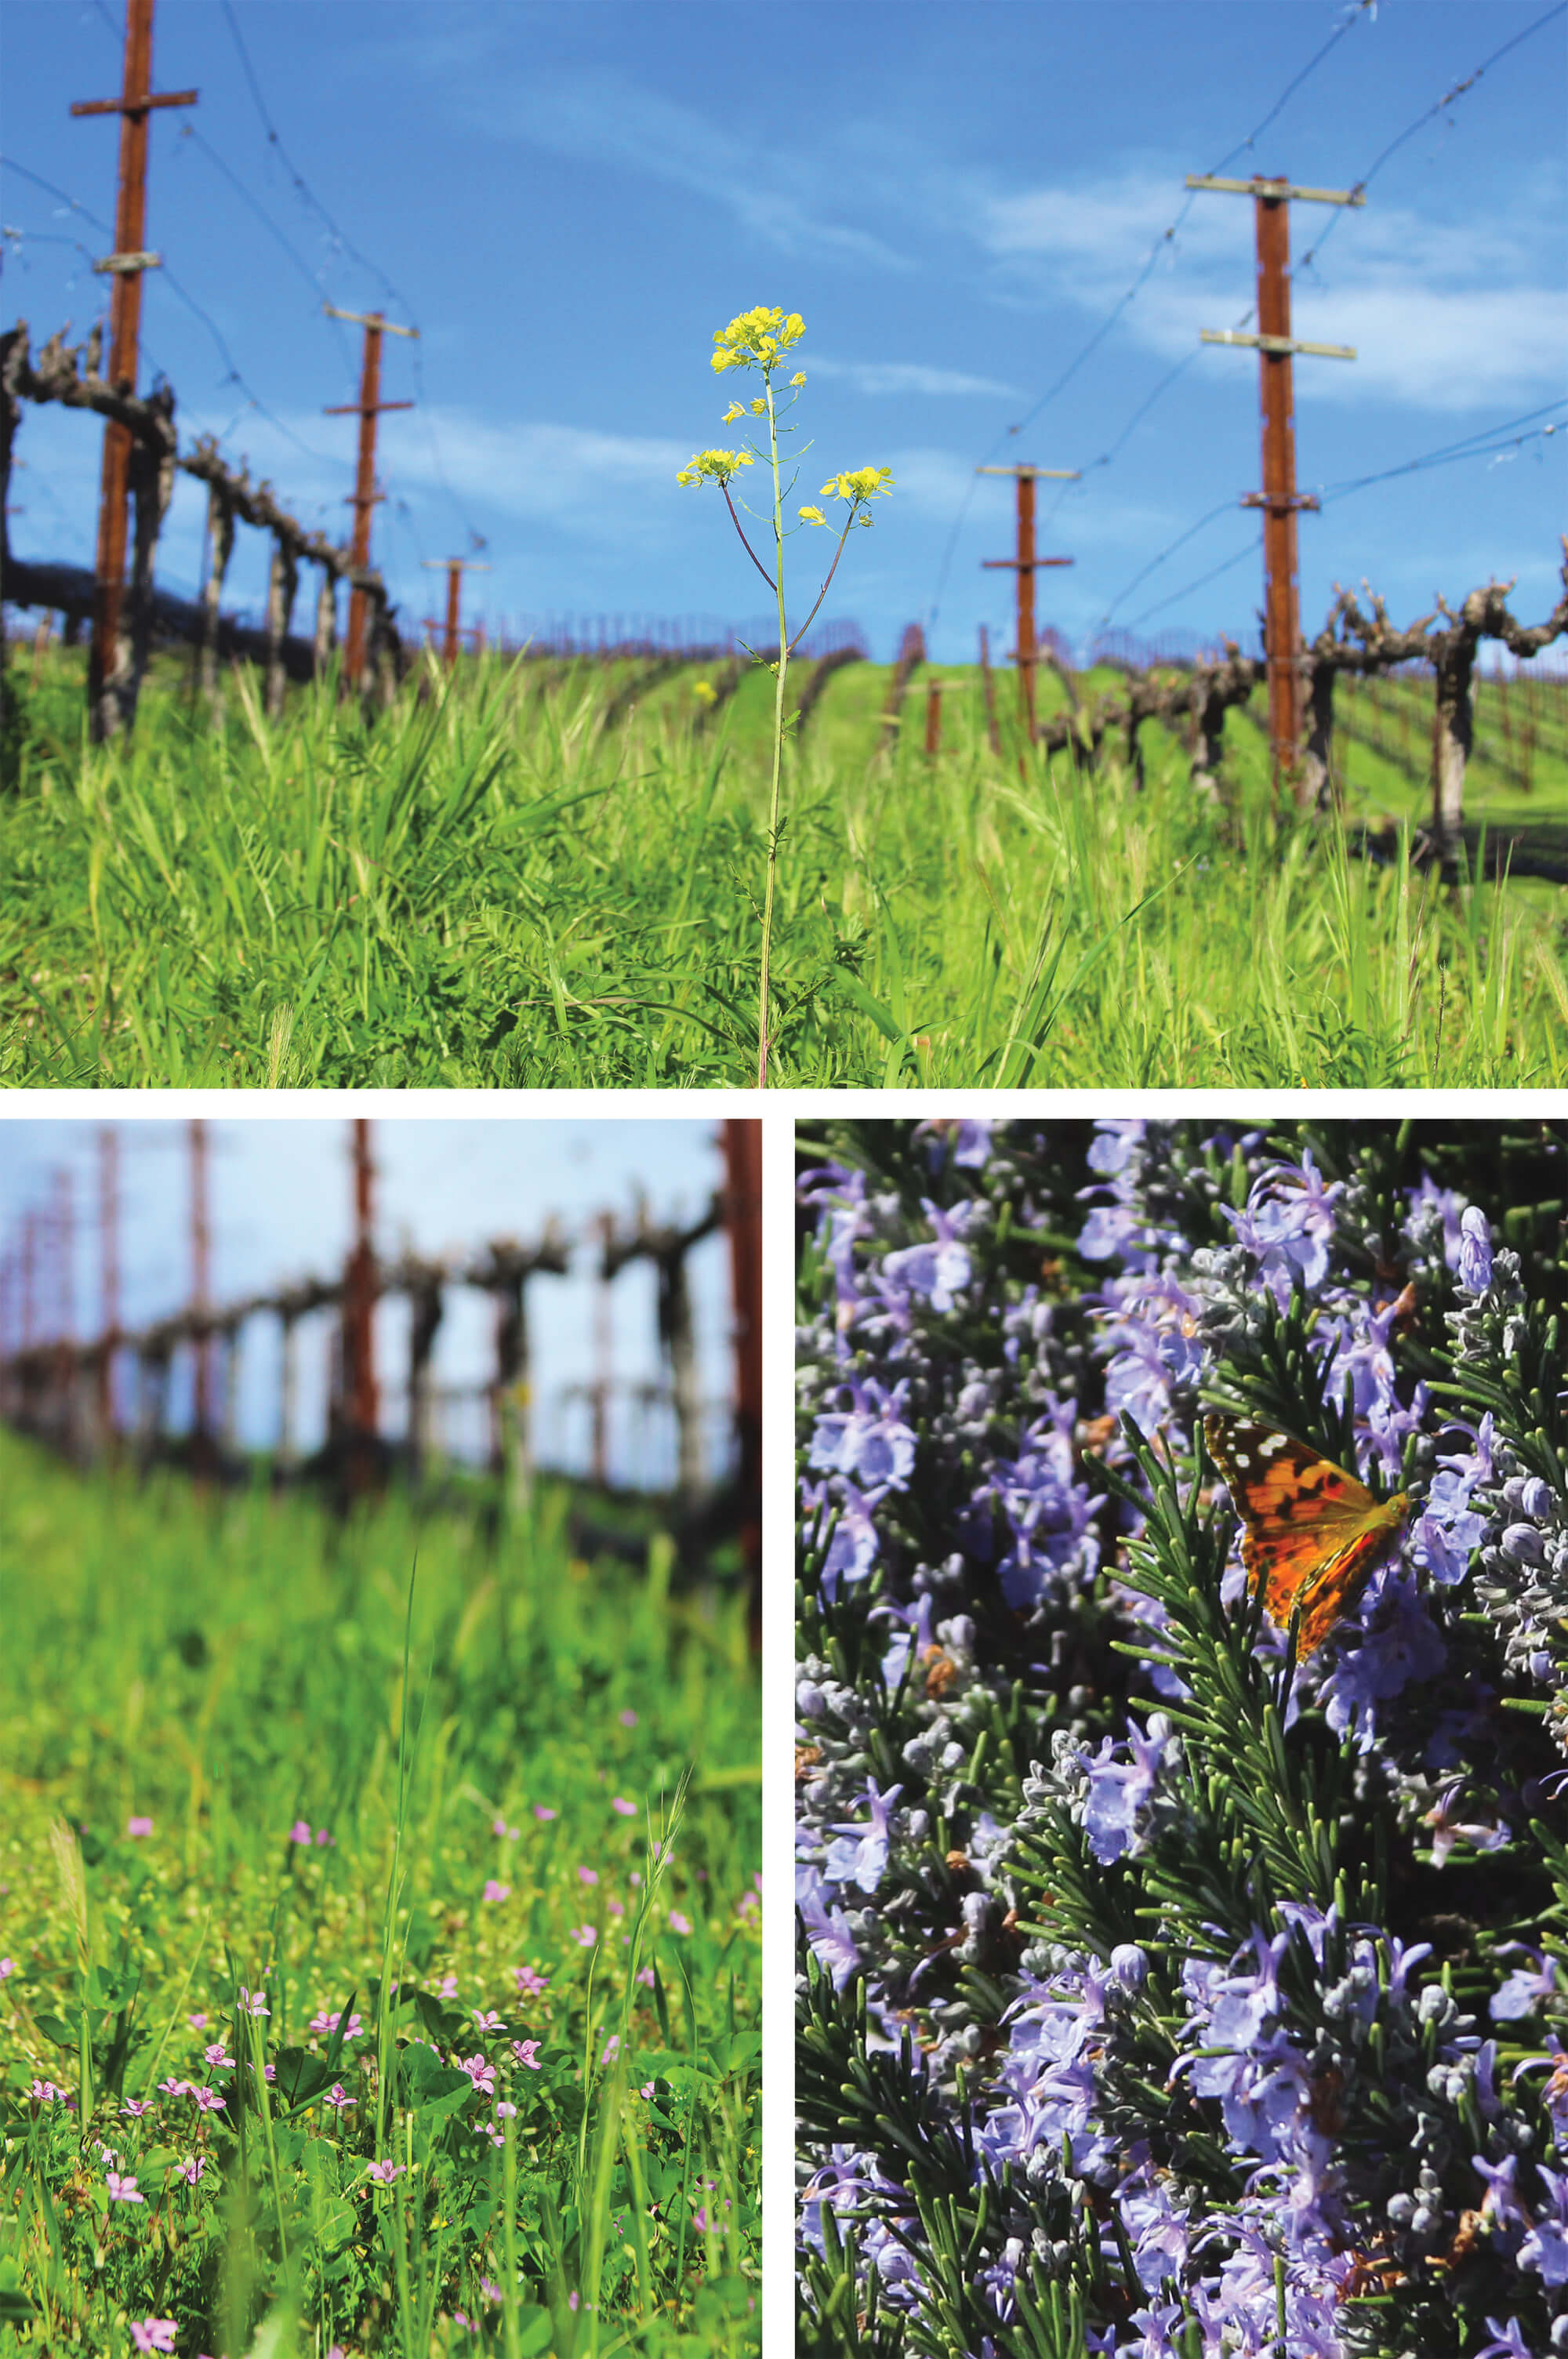 Three photos featuring a variety of flowers and butterflies in the vineyard in spring